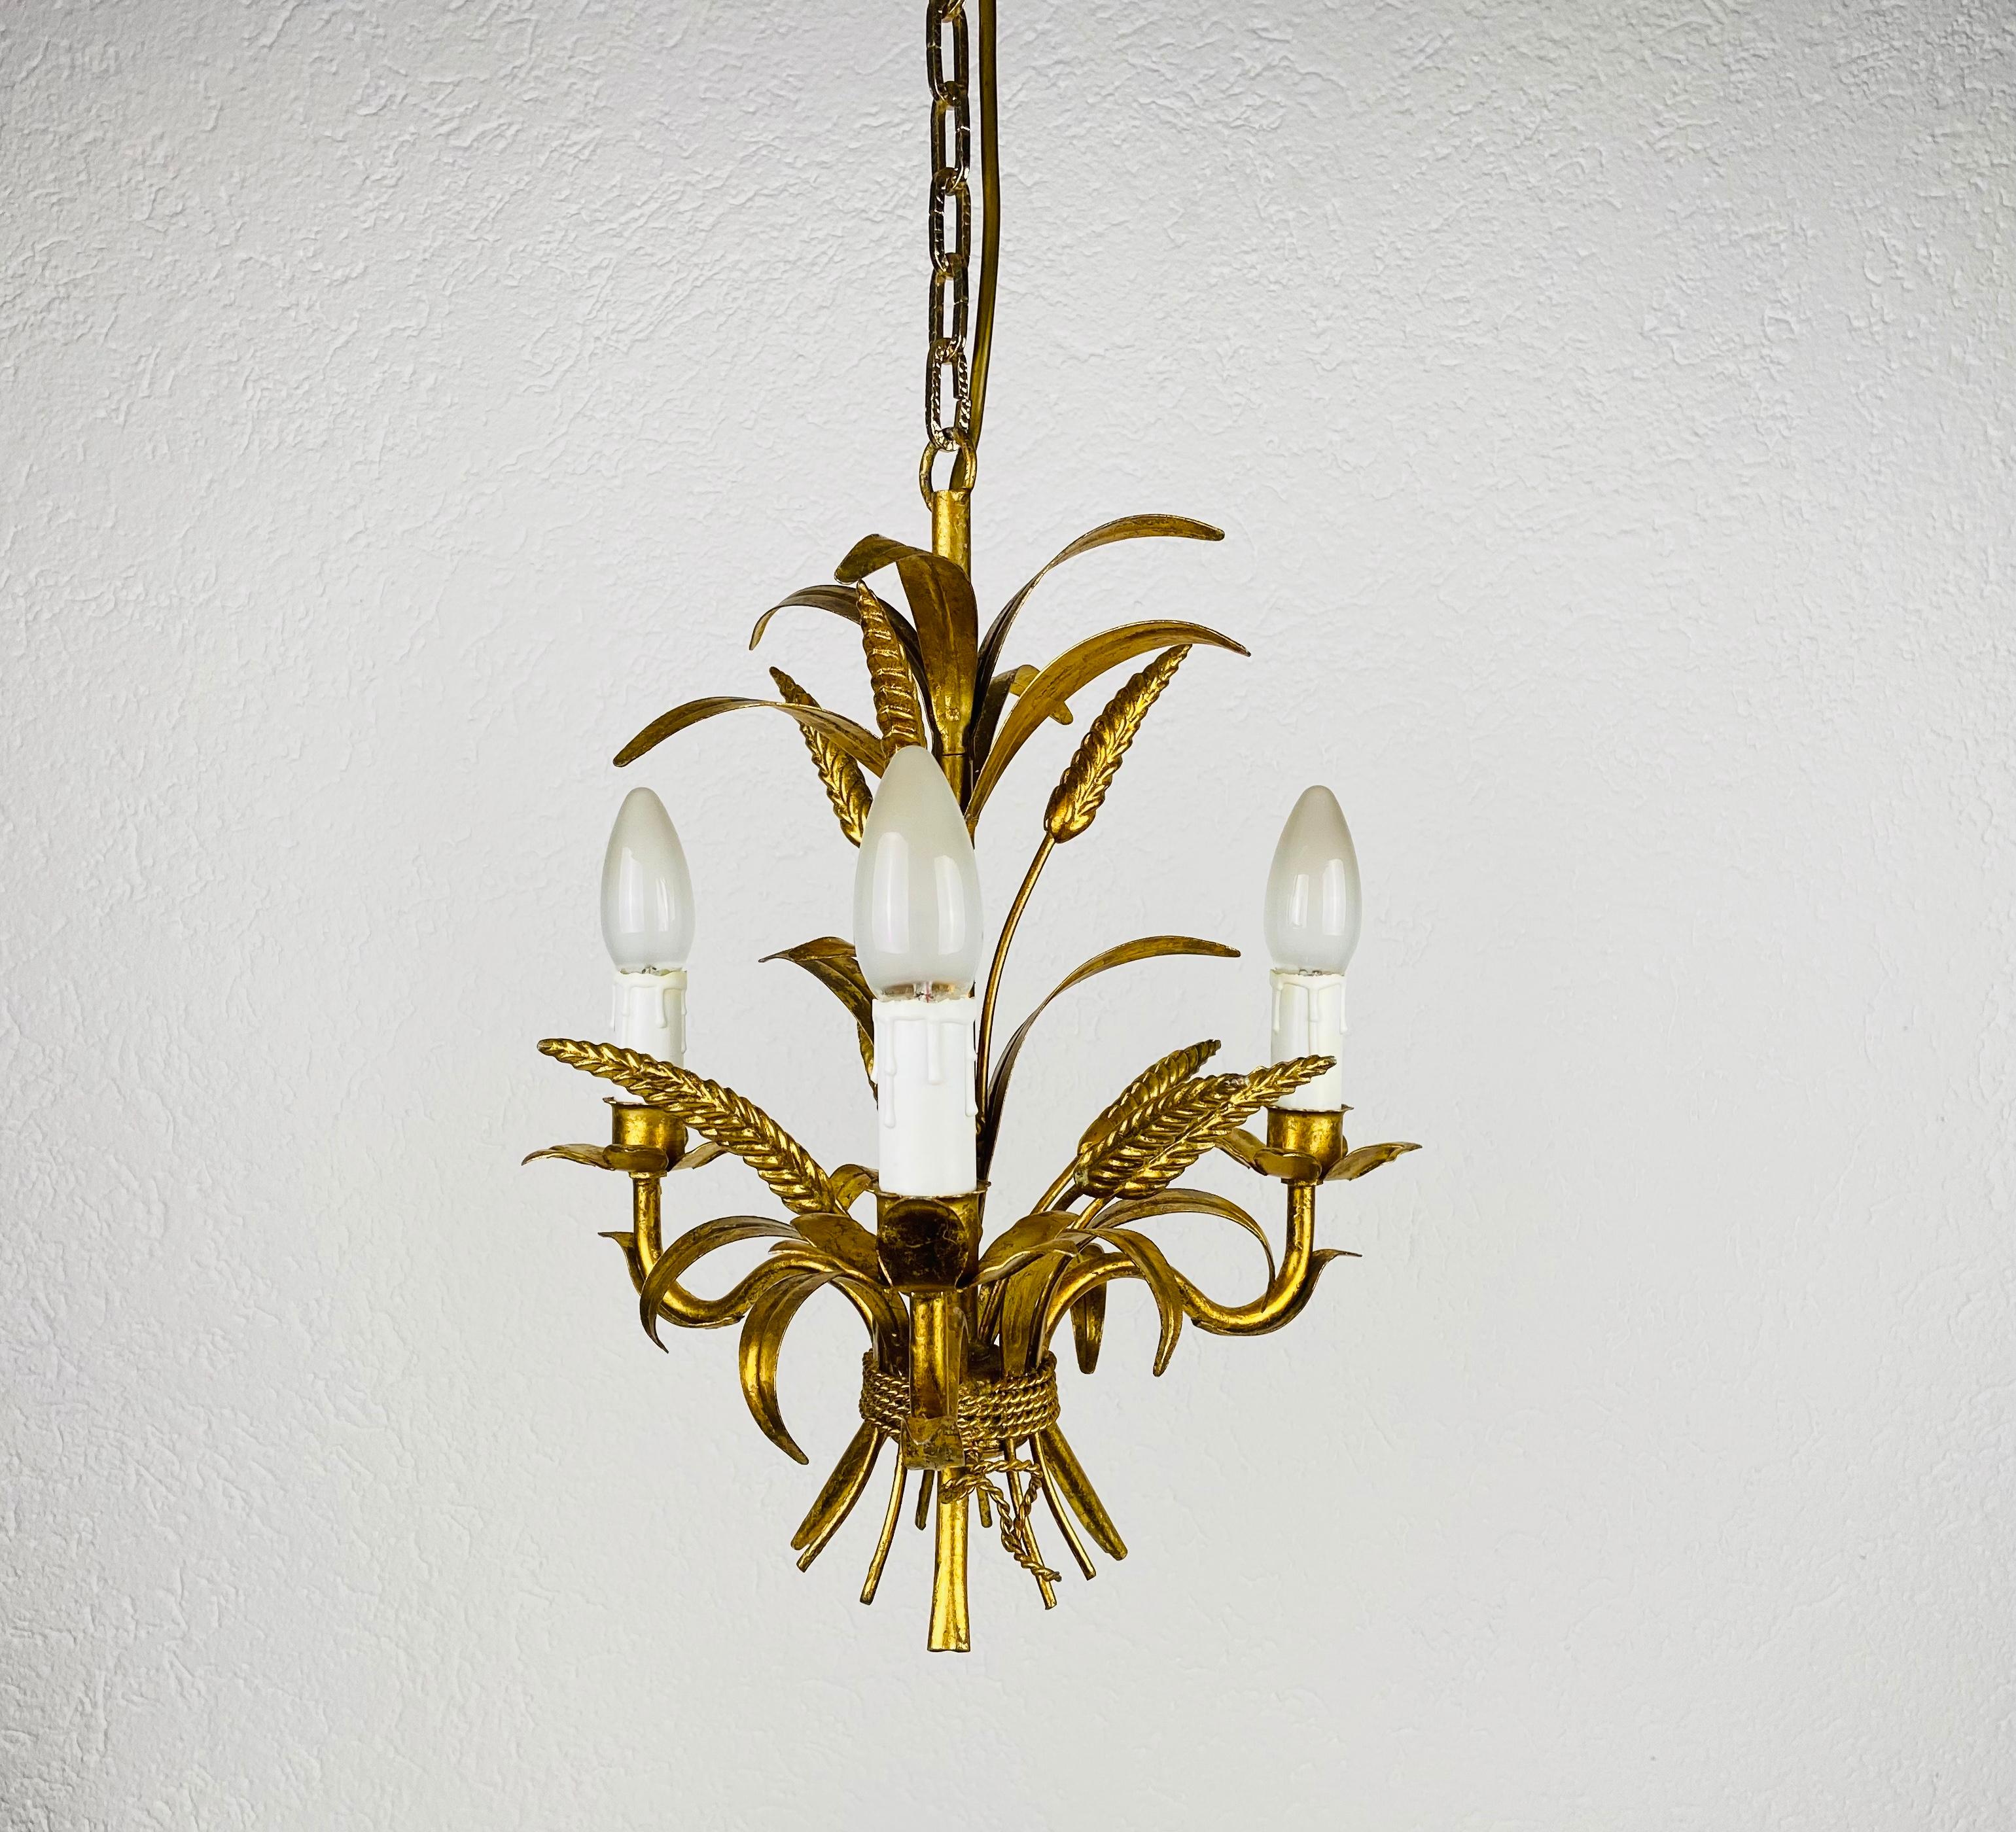 An extraordinary pendant lamp by the German designer Hans Kögl made in Germany in the 1970s. The lamp has a beautiful wheat sheaf design. It is made in the period of Hollywood Regency.

The light requires three E14 light bulbs. Works with both